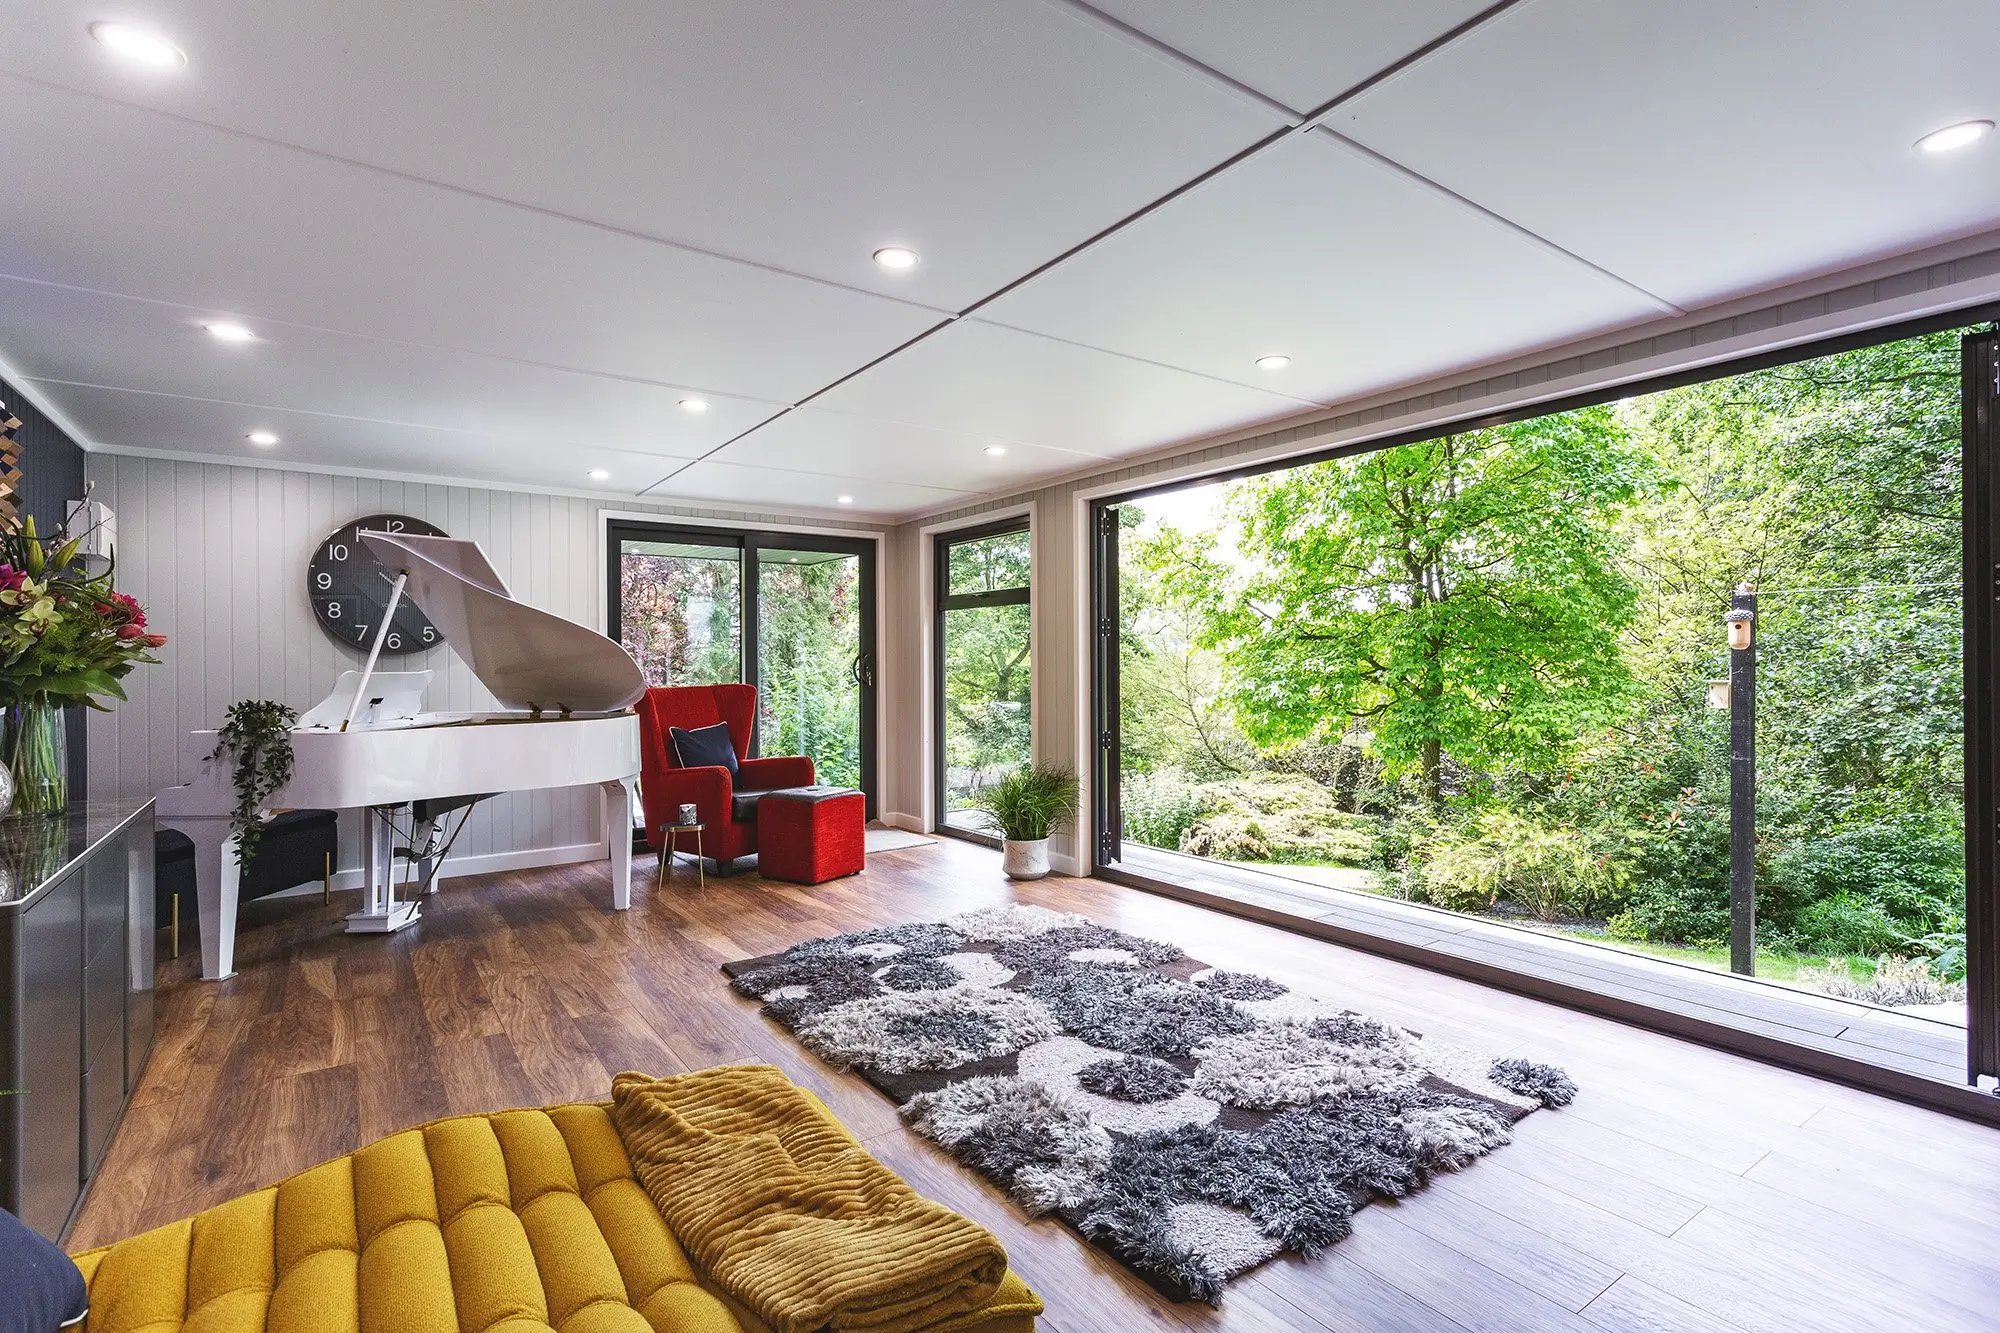 Large marley veranda garden room with large open bifold doors onto grassy lawn area with monochrome rug and large white piano in corner of the room